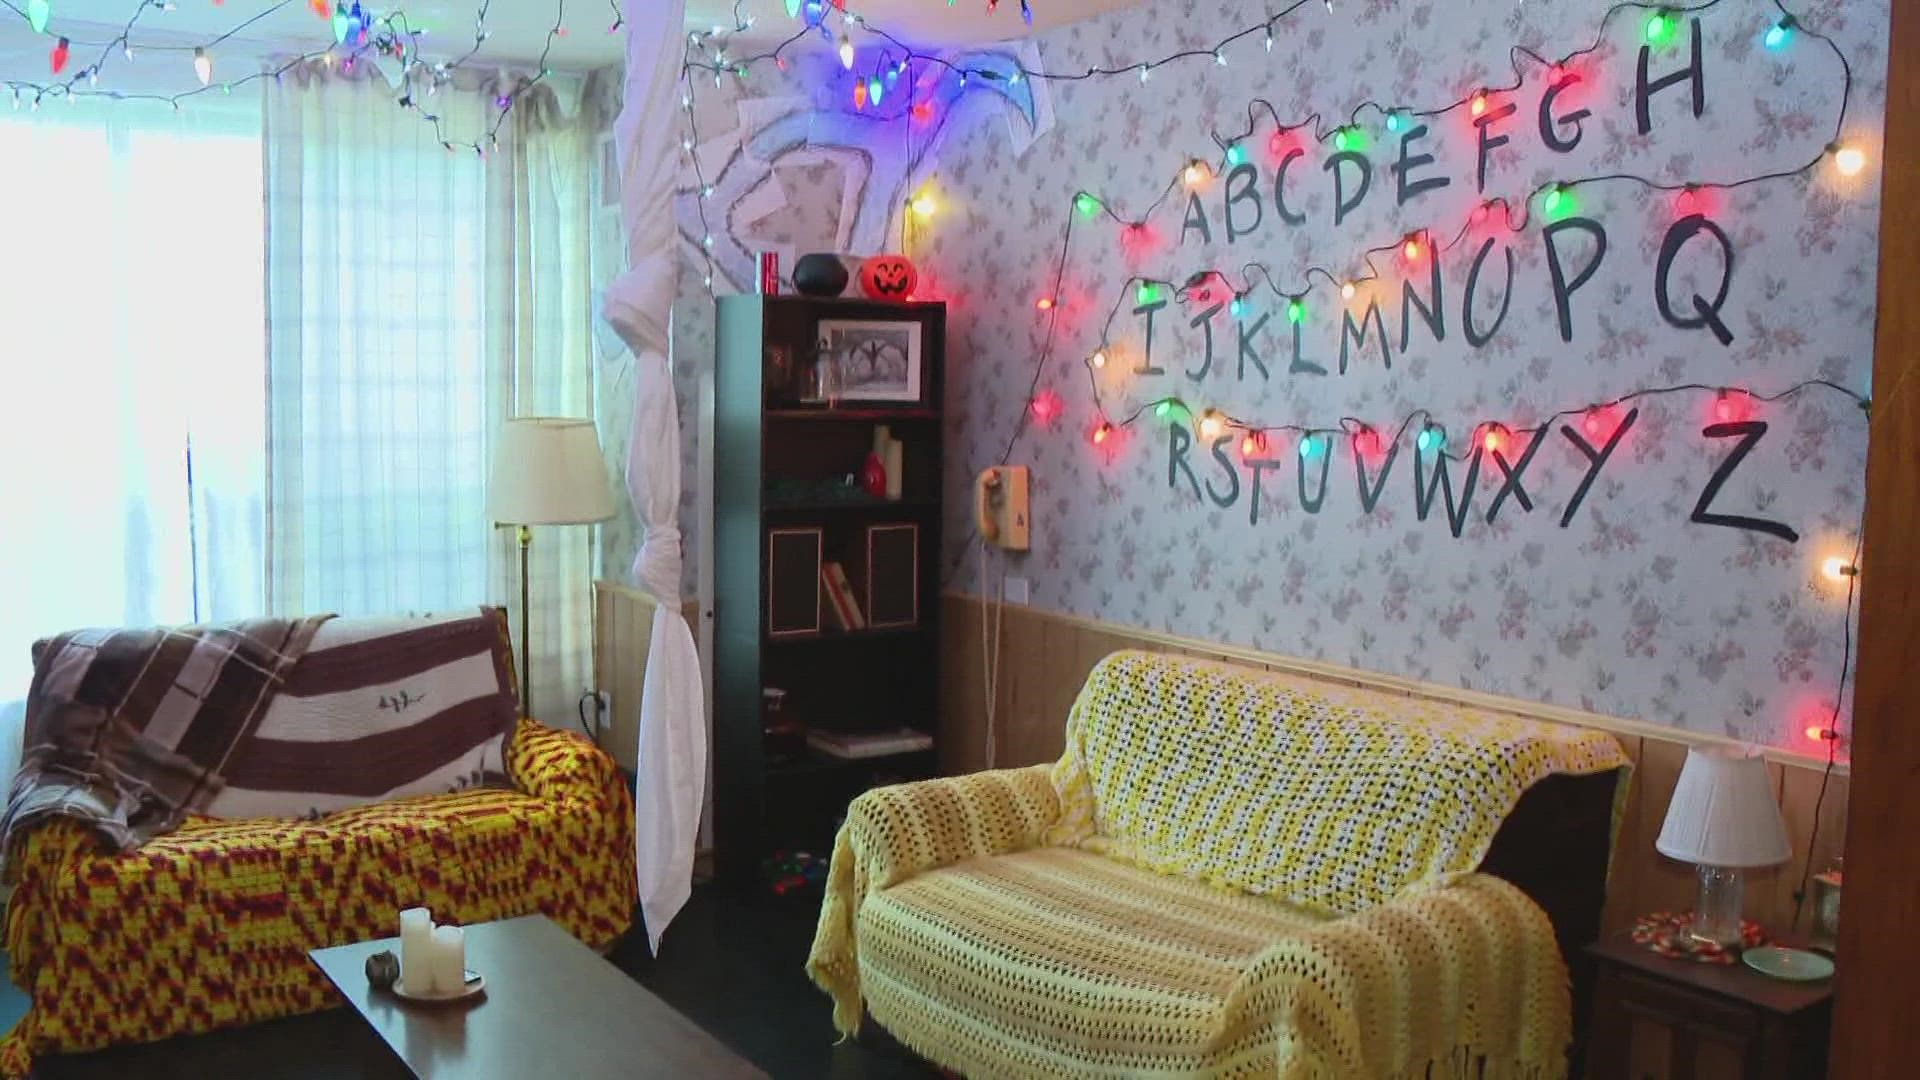 If you're a fan of the hit Netflix show "Stranger Things," now you can feel like you're in the series.